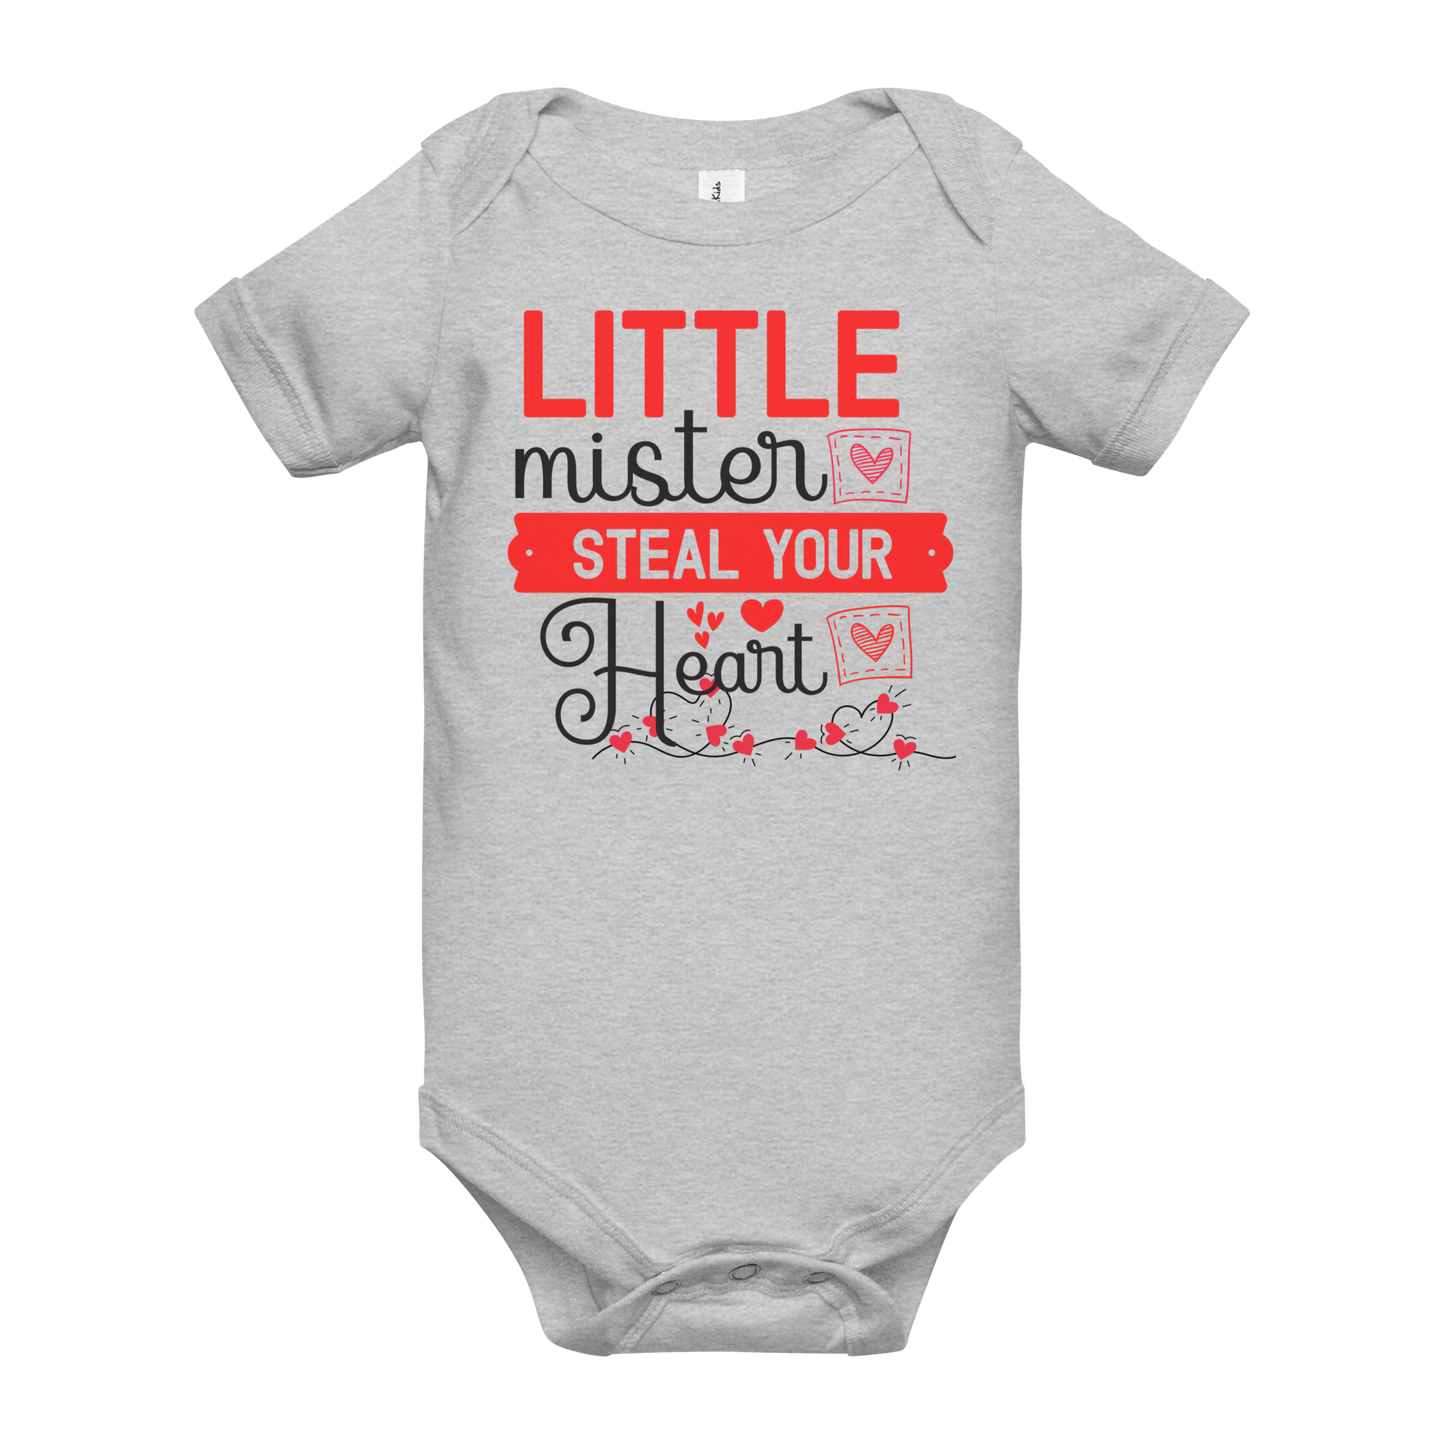 Little Mister. Steal Your Heart Baby Onesie